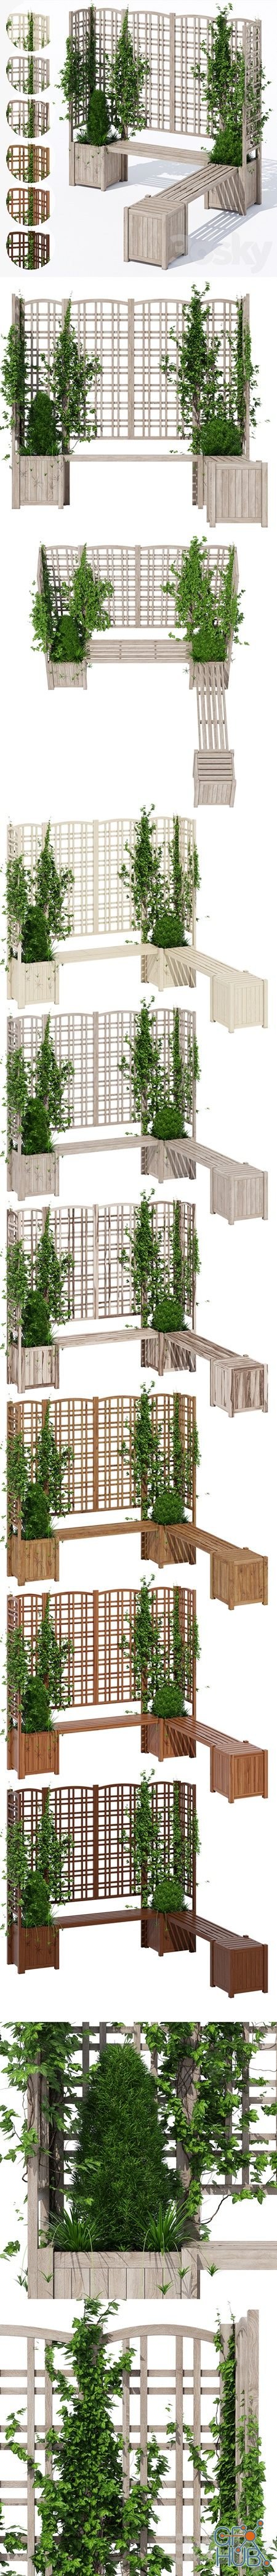 Outdoor Eucalyptus Privacy Screen Trellises and Planters